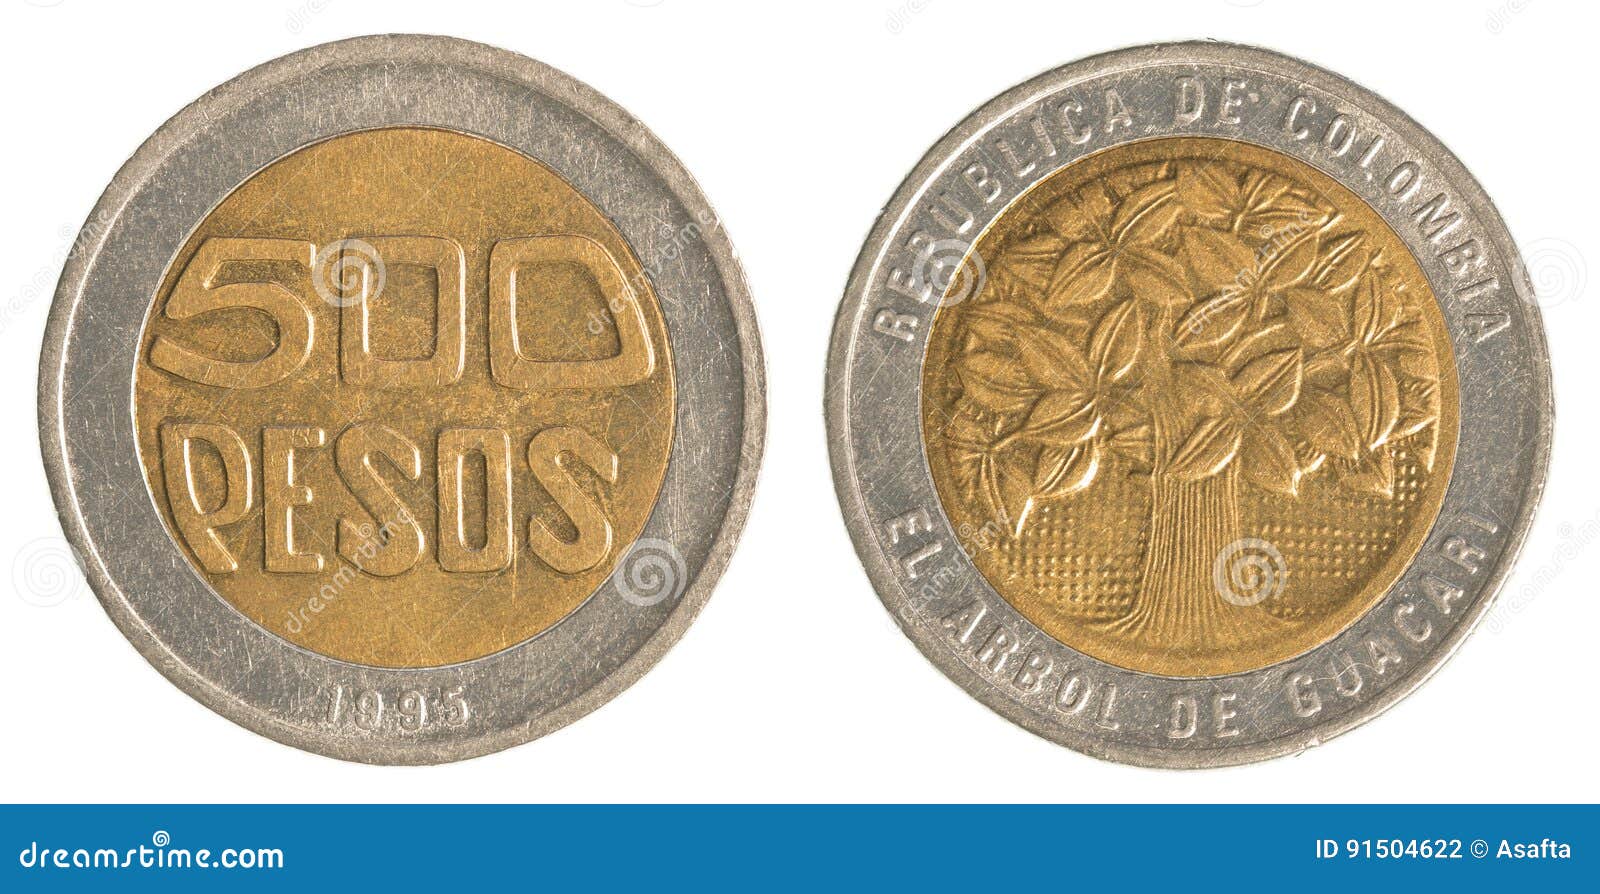 https://thumbs.dreamstime.com/z/colombian-pesos-coin-isolated-white-background-91504622.jpg